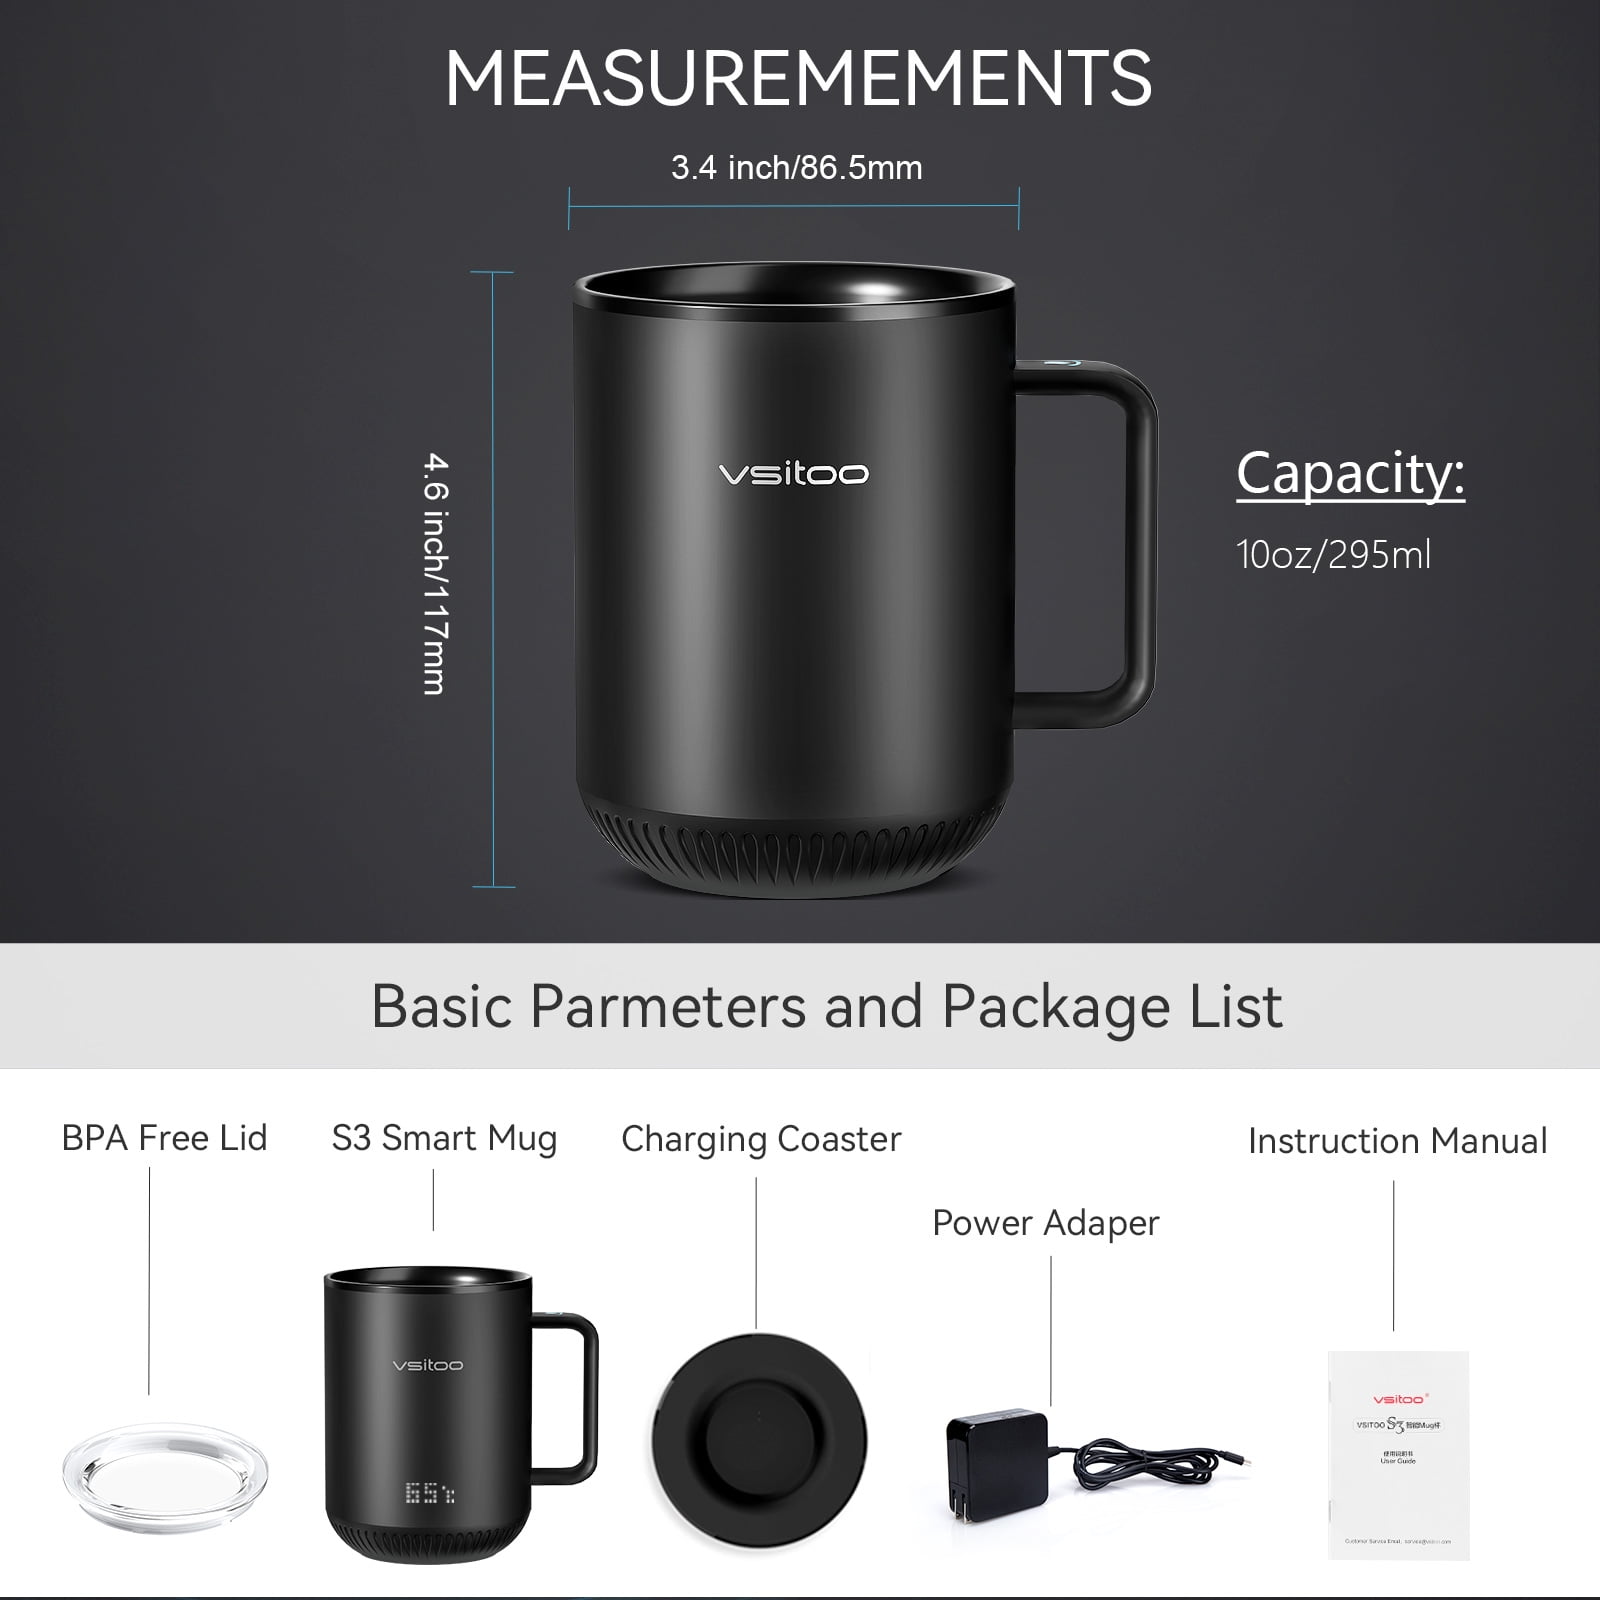 VSITOO S3 Temperature Control Smart Mug 2 with Lid, Self Heating Coffee Mug  10 oz, Touch Tech&LED Display, Black, 1.5-hr Battery Life - App Controlled Heated  Coffee Mug - Improved Design, Coffee Gifts 